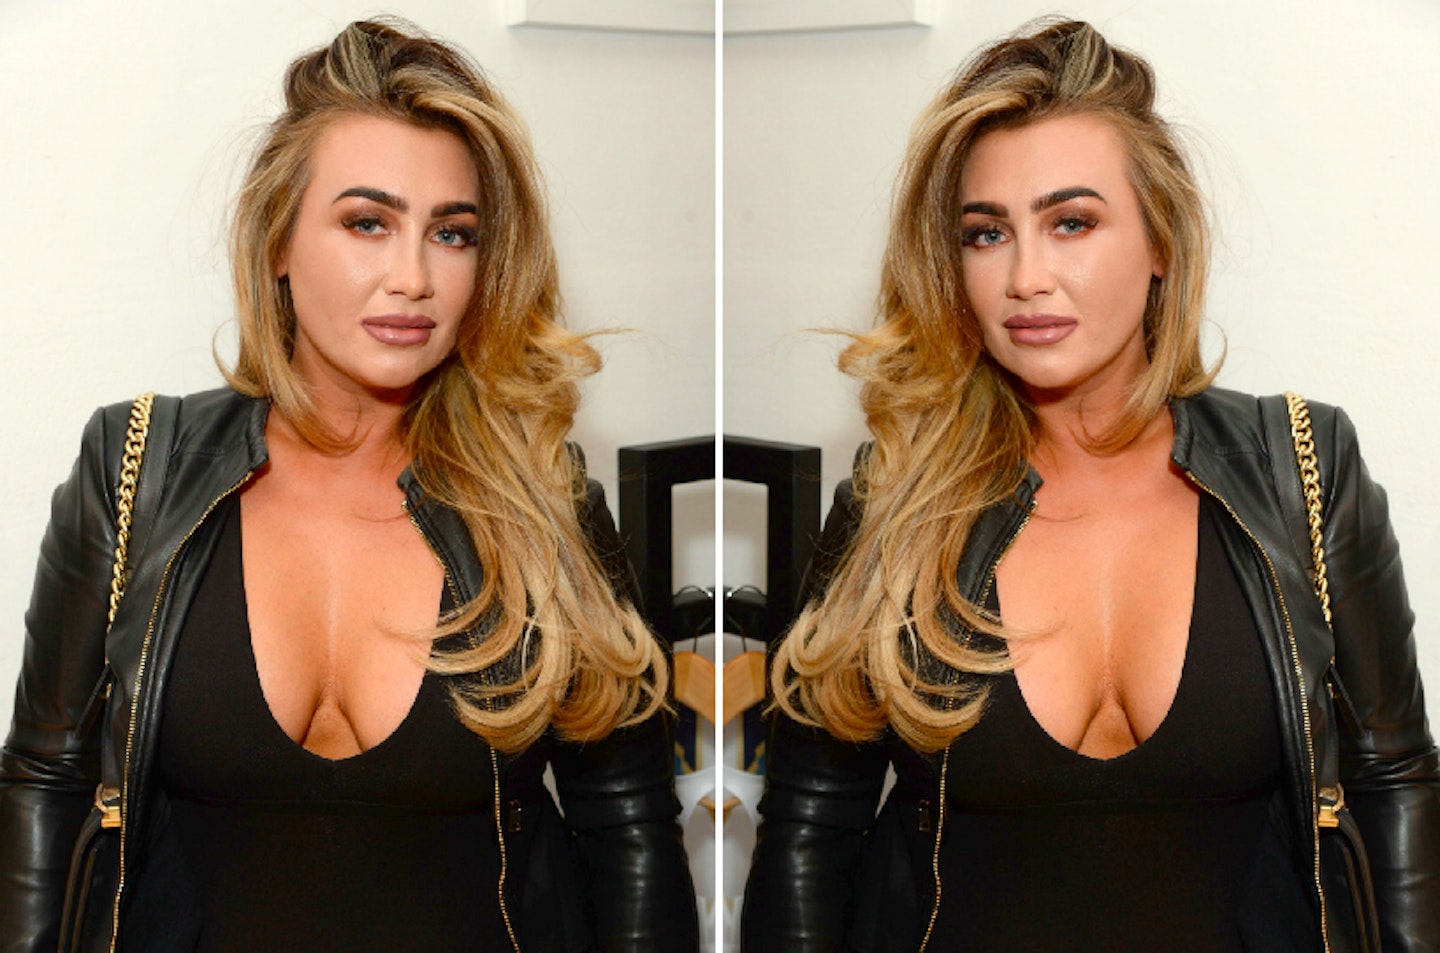 Lauren Goodger displays her curves in chic jumpsuit and gets back